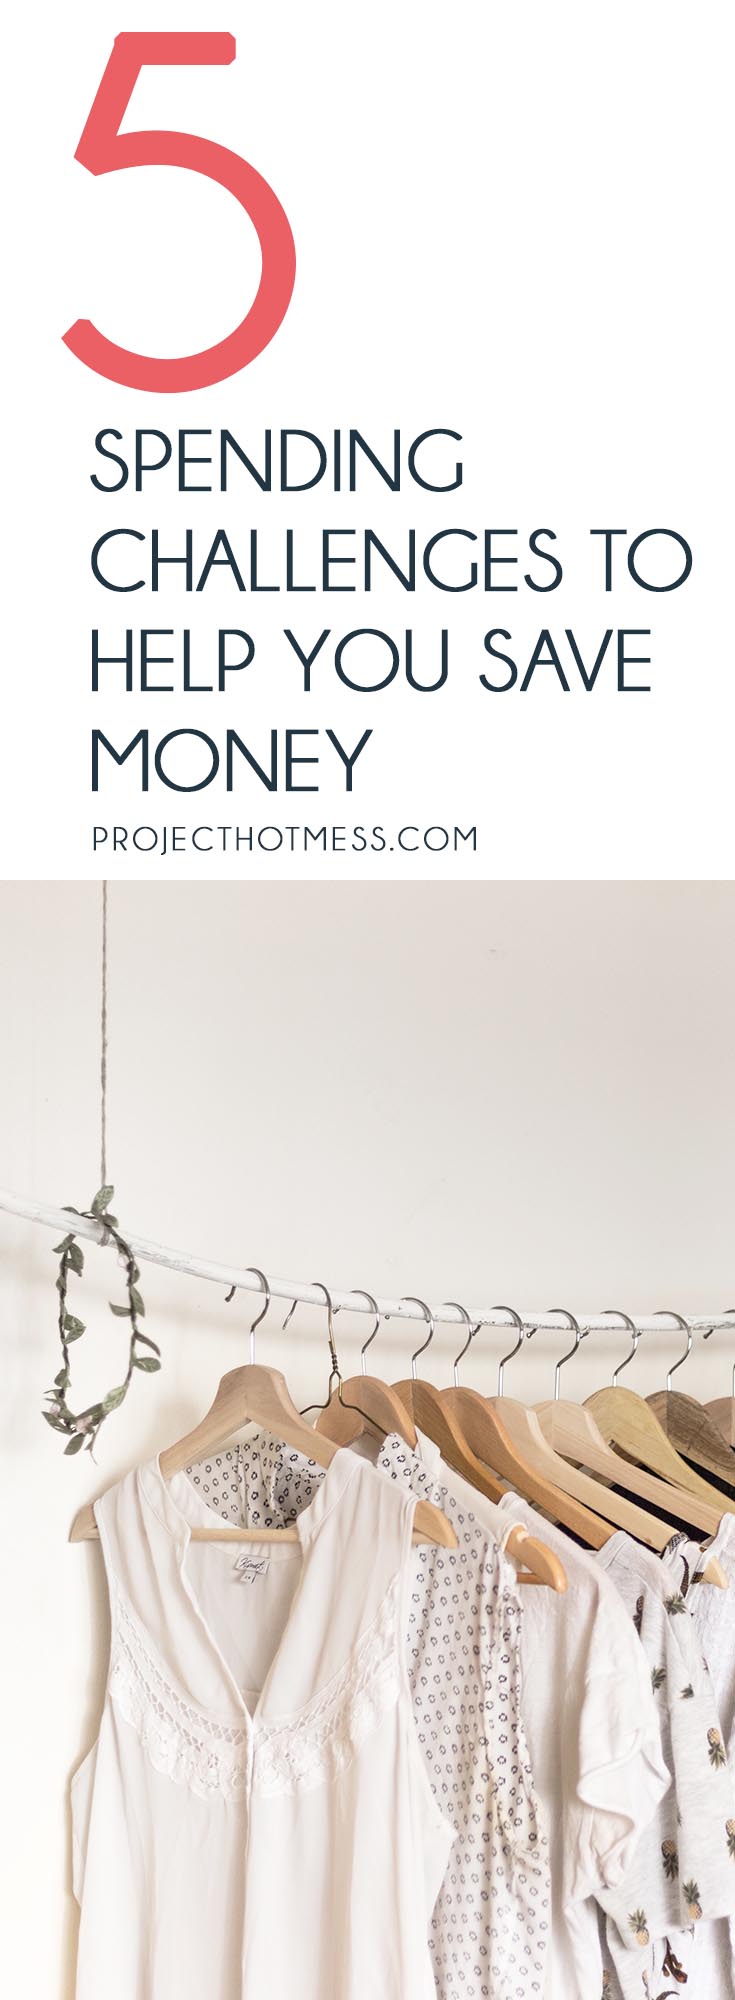 Budgets can get boring and stale after a while, so try out some of these spending challenges that can help you save money and achieve your savings goals.